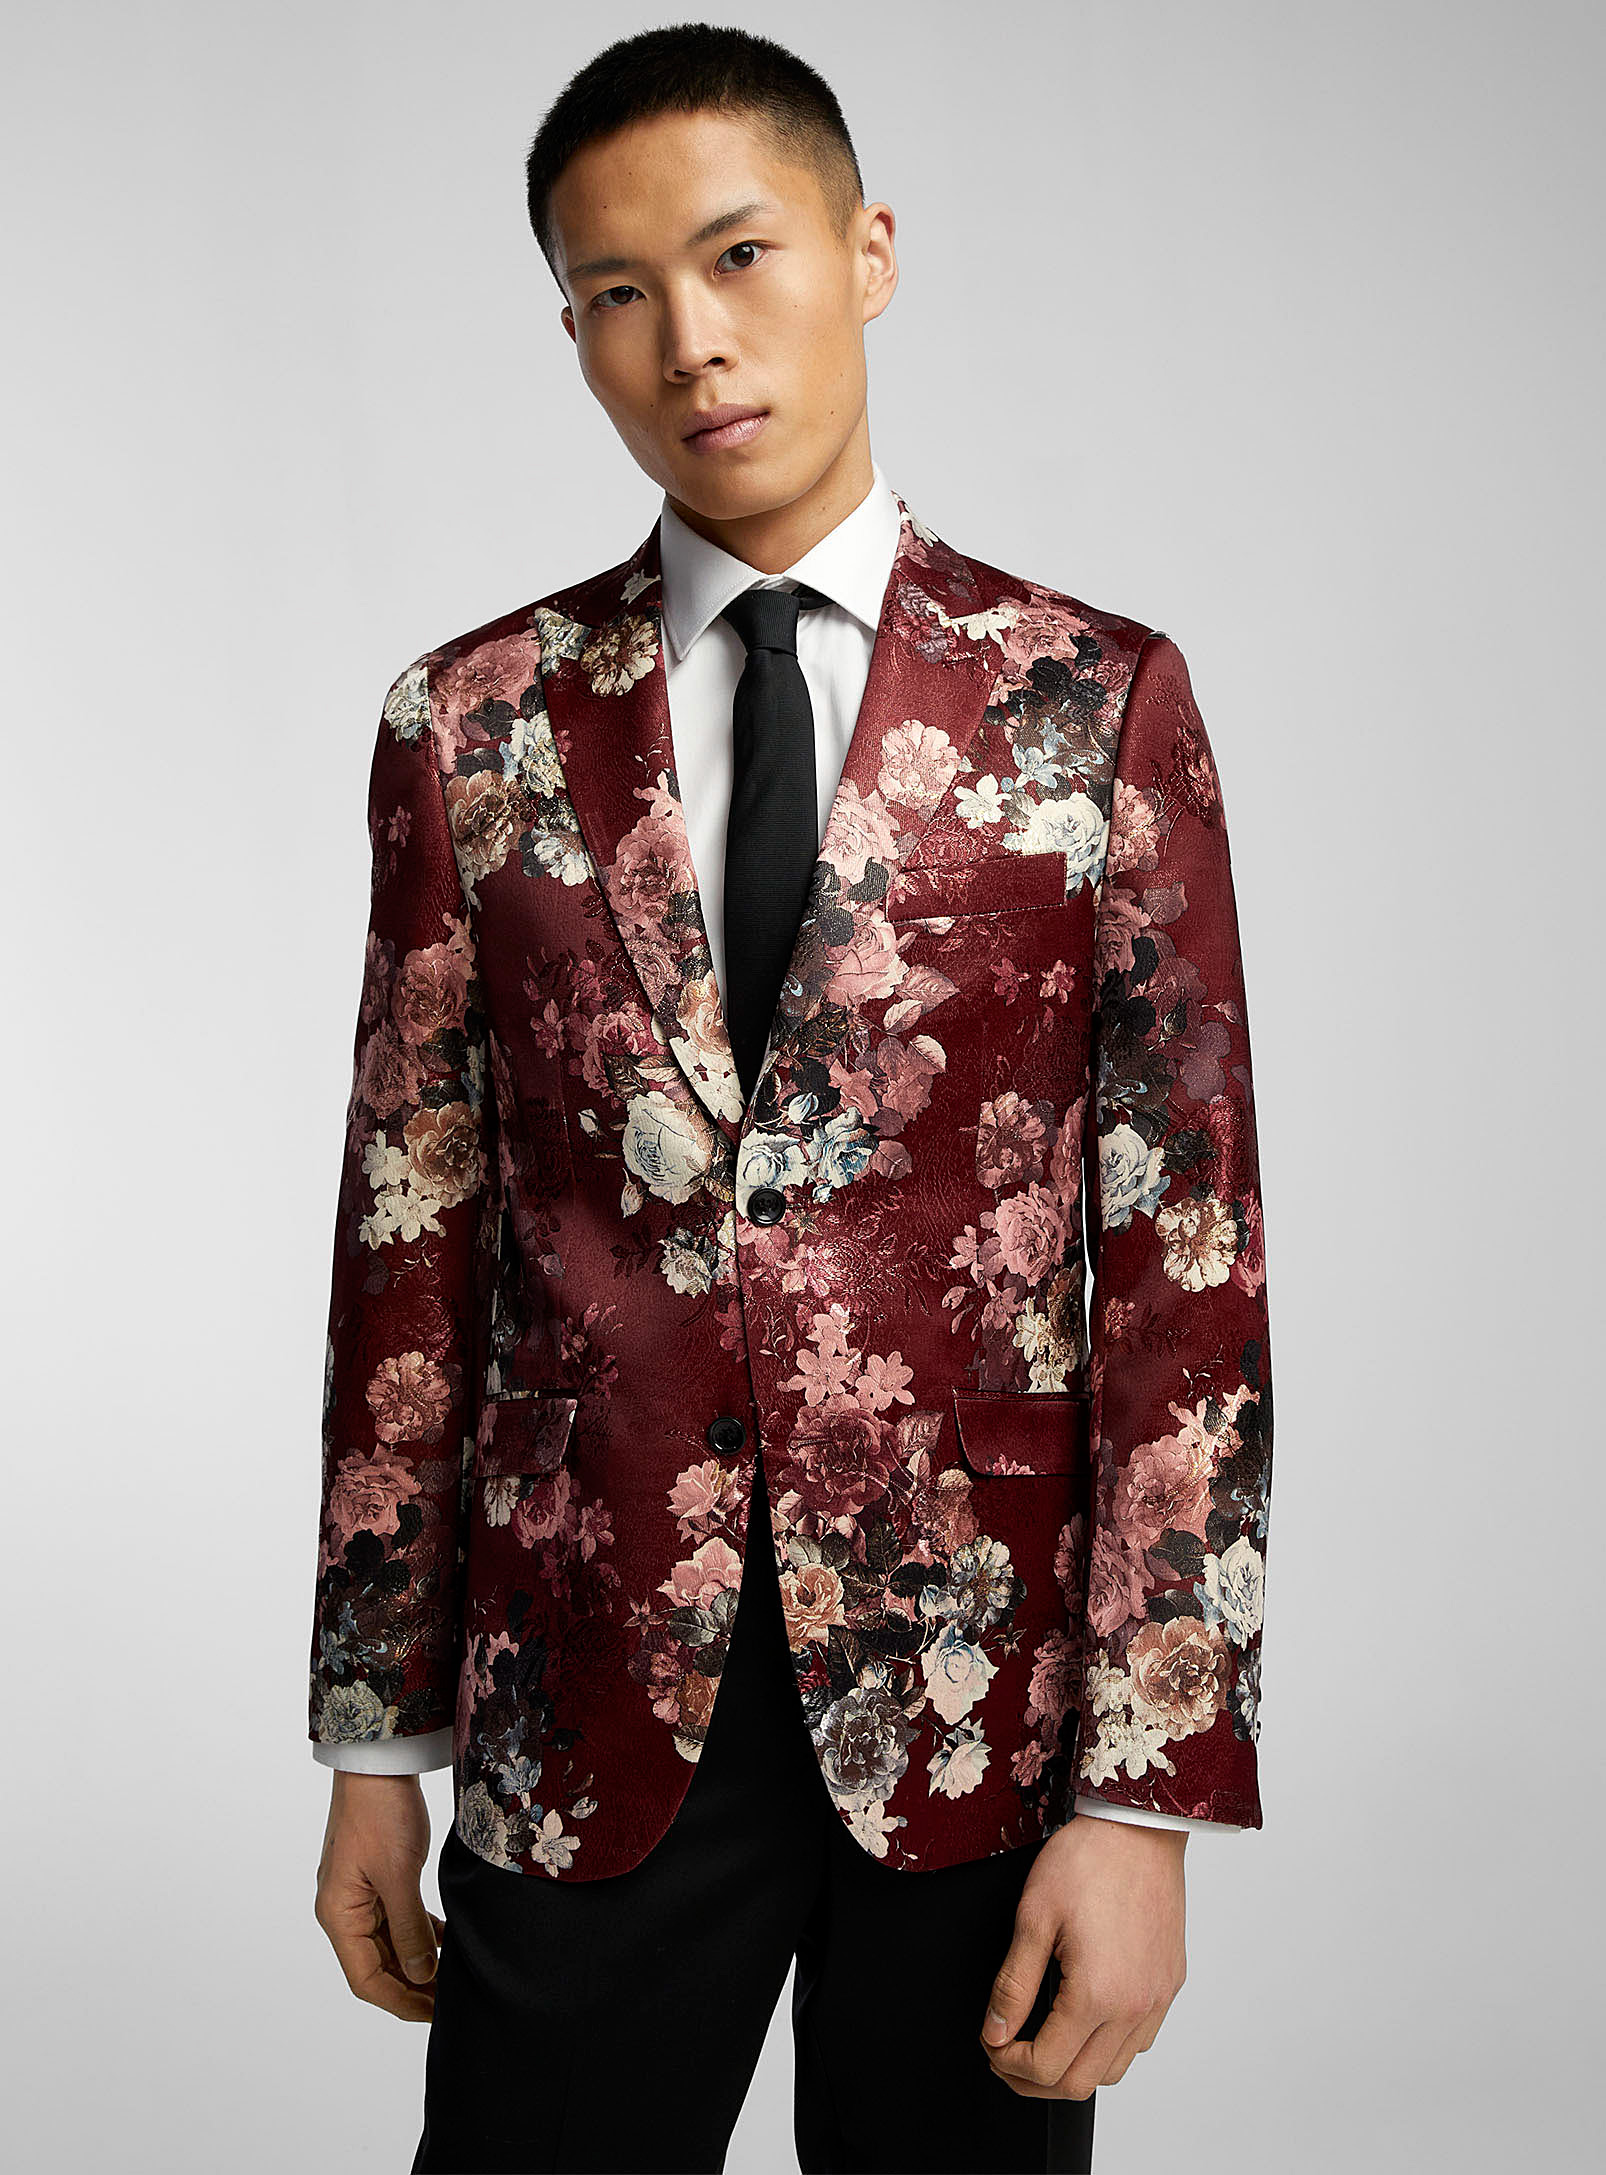 Soul Of London Shiny Floral Jacquard Jacket Slim Fit In Ruby Red